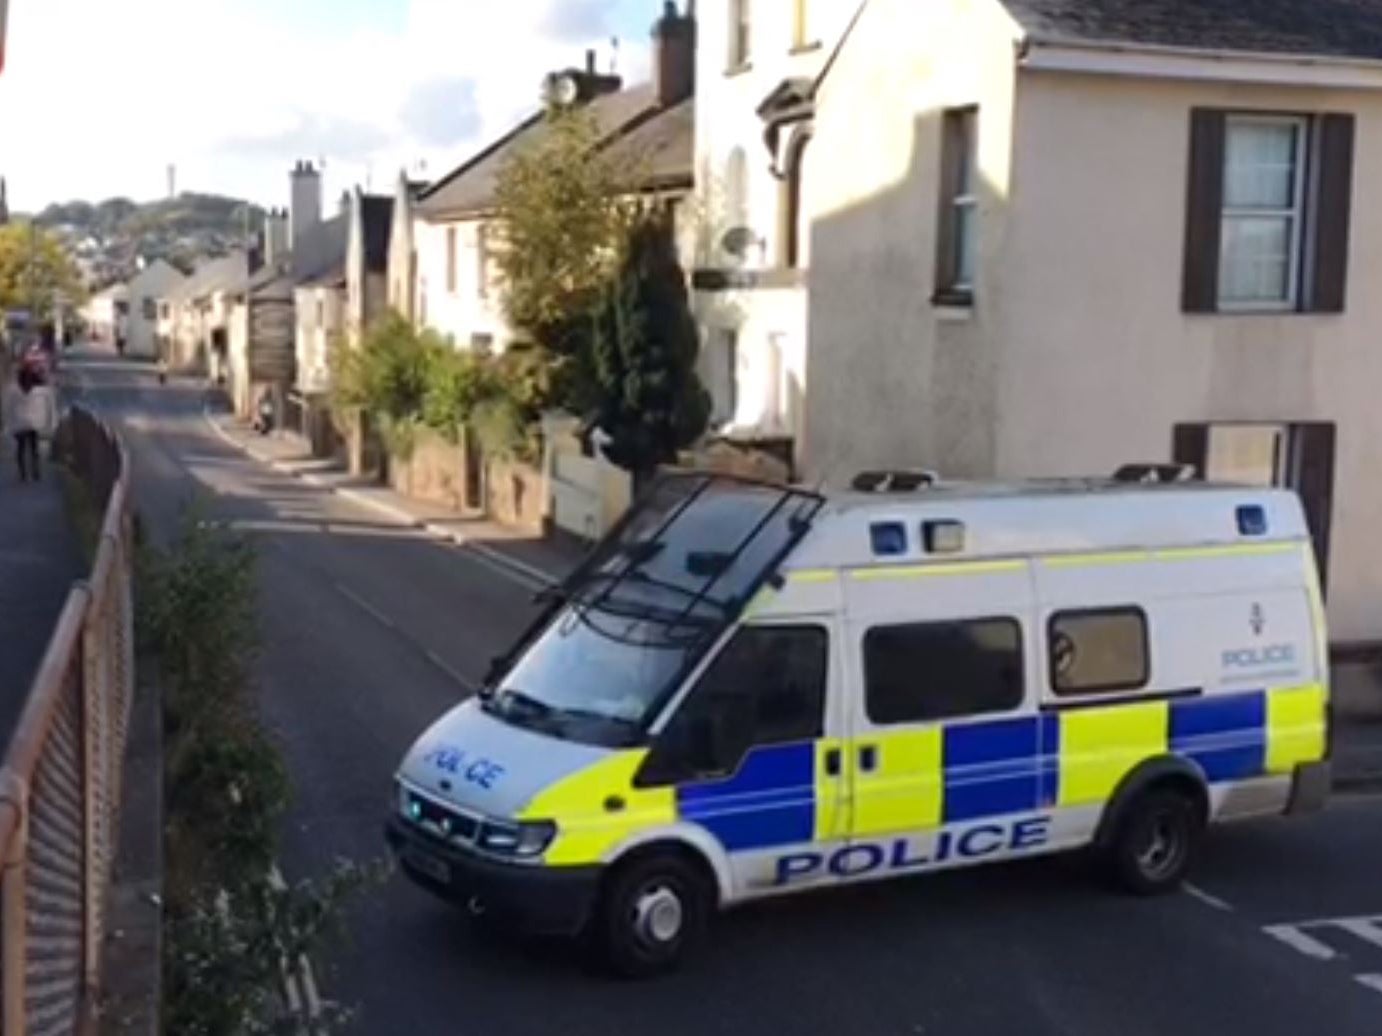 A suspicious item has been discovered at an address in Tudor Road in Newton Abbot, Devon